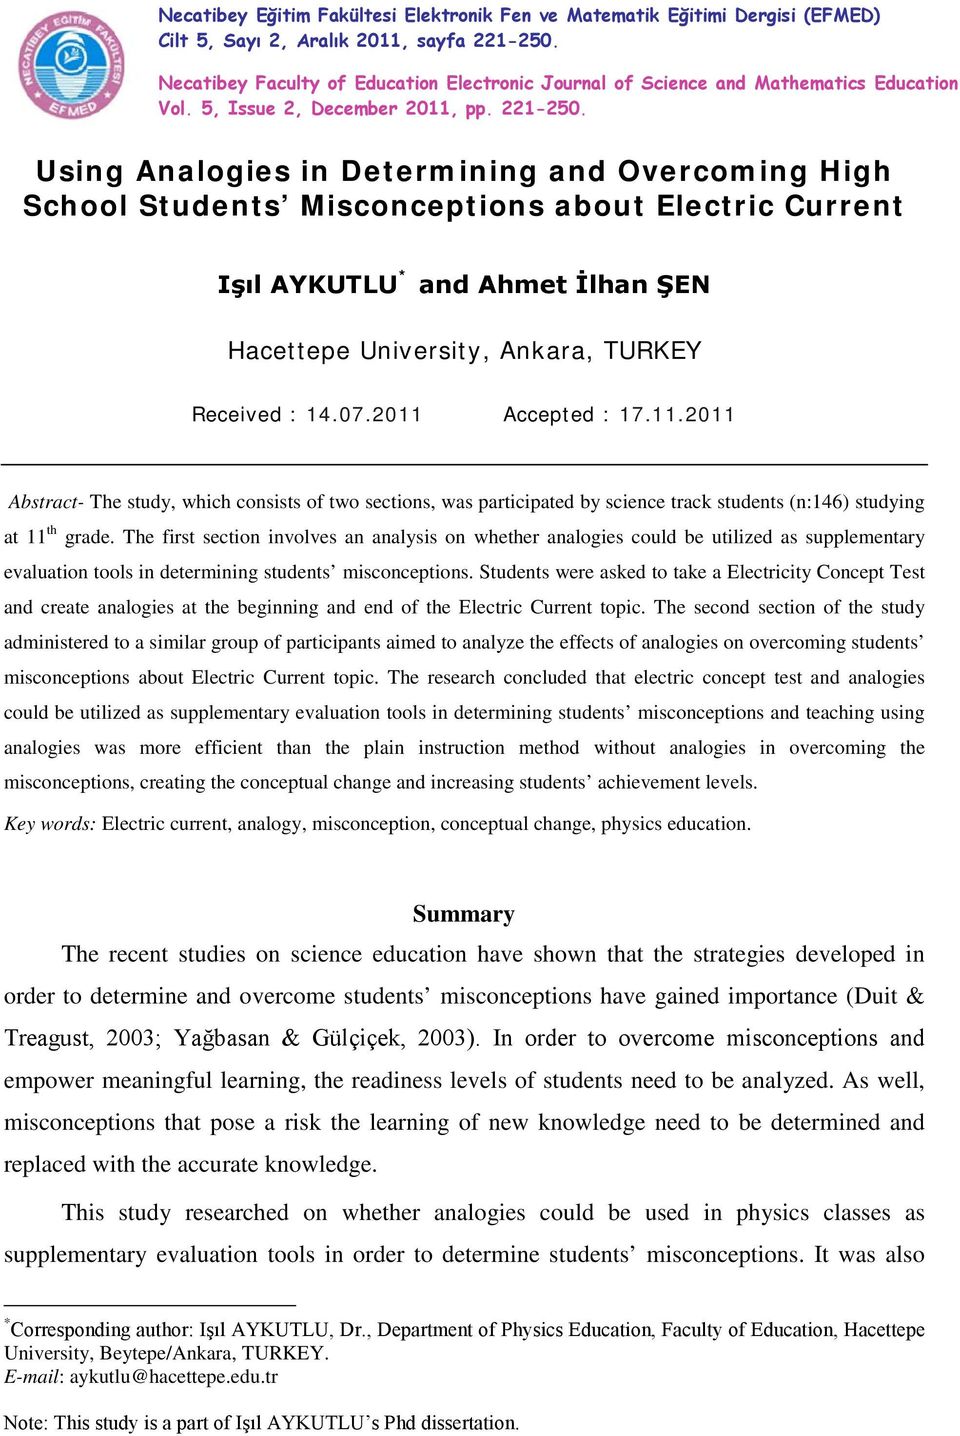 Using Analogies in Determining and Overcoming High School Students Misconceptions about Electric Current Işıl AYKUTLU * and Ahmet İlhan ŞEN Hacettepe University, Ankara, TURKEY Received : 14.07.